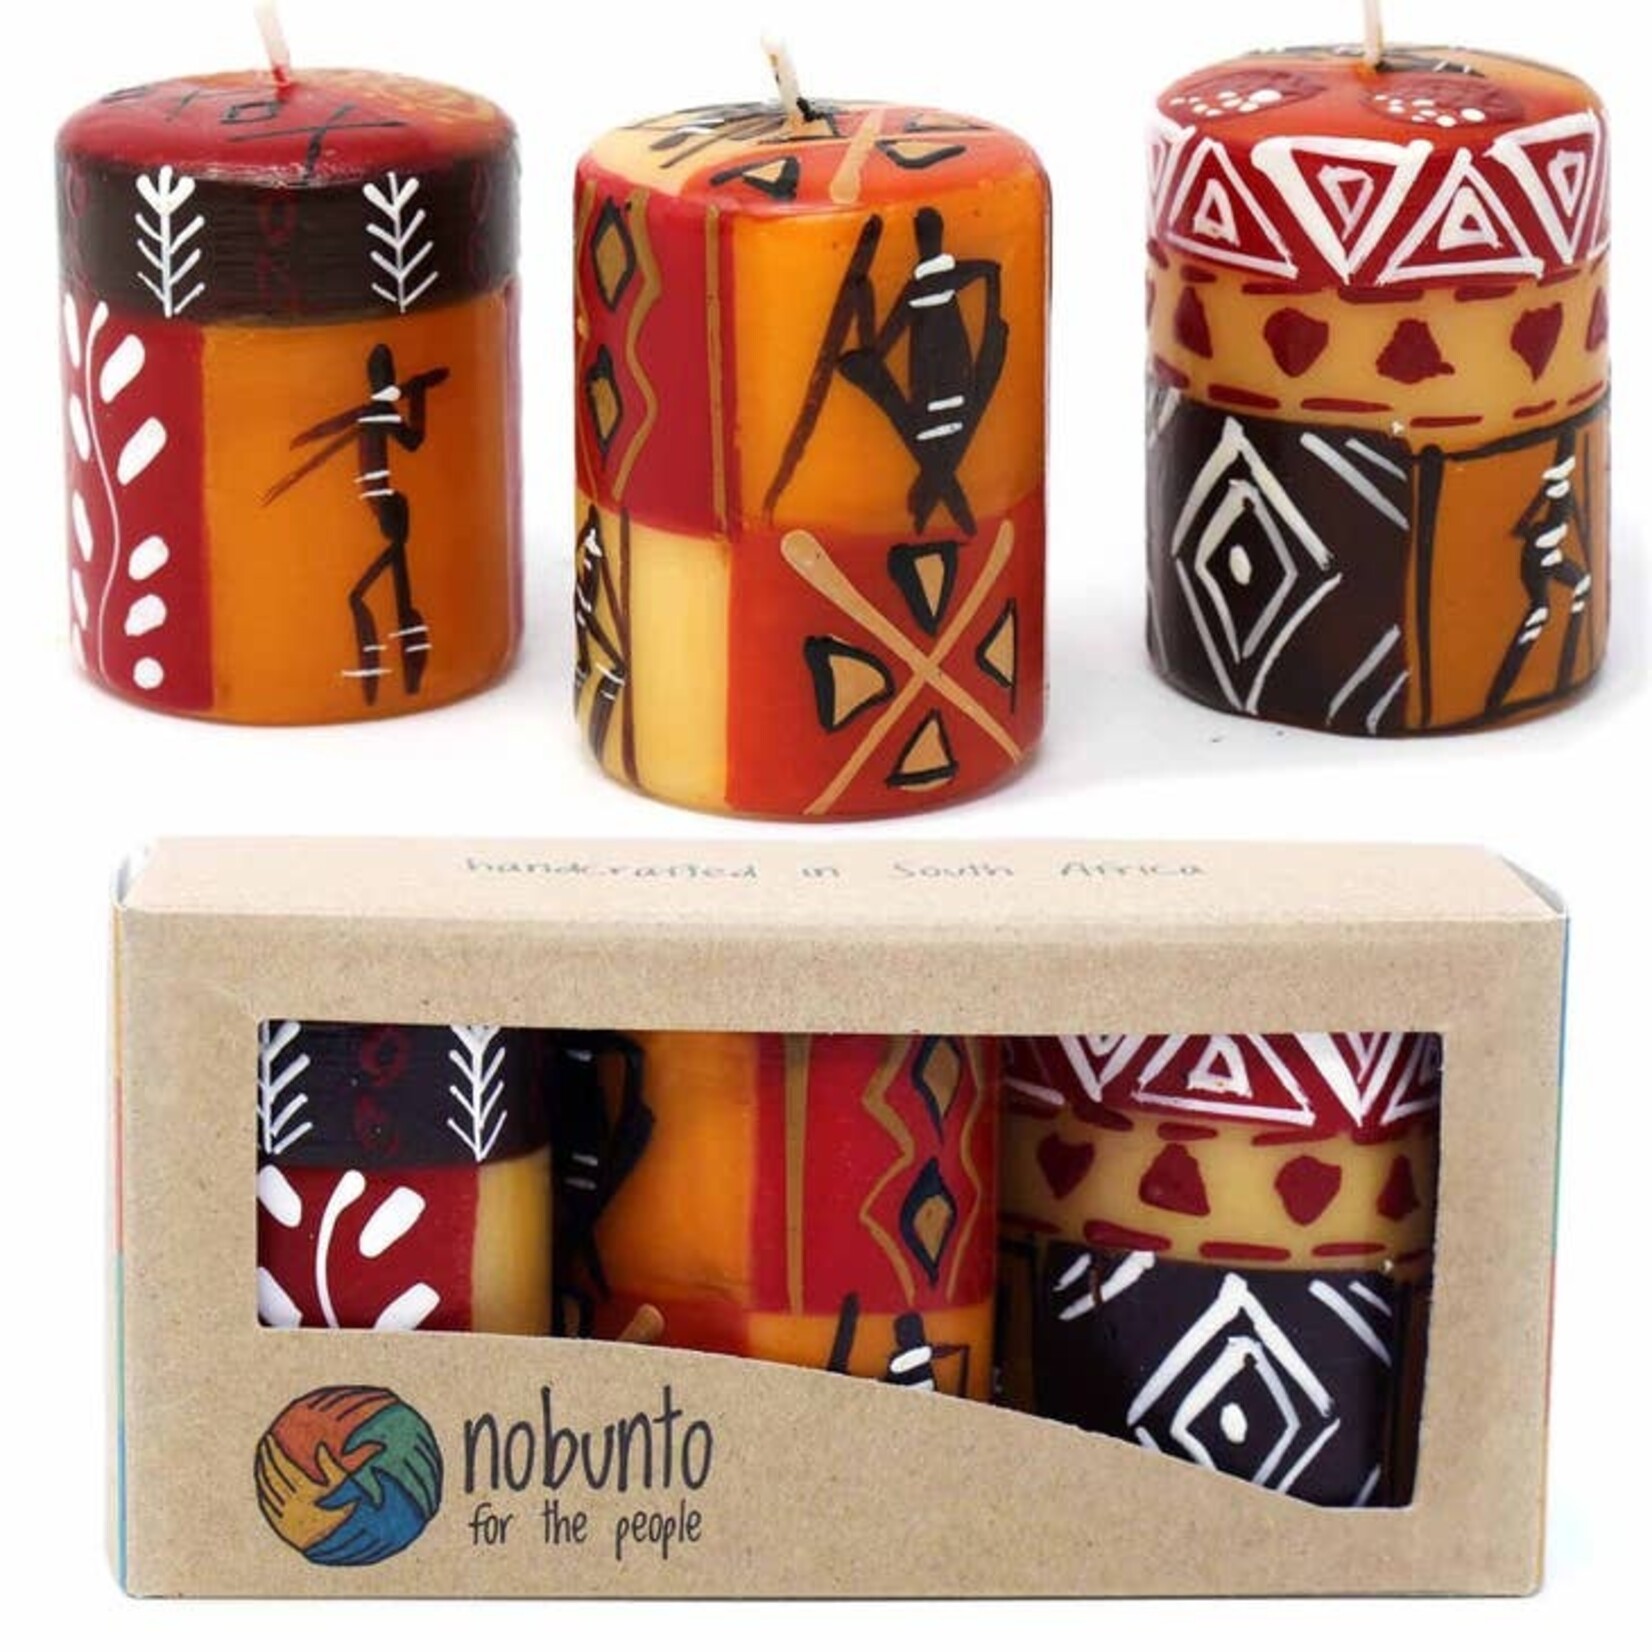 Global Crafts Hand Painted Votive Candles Set of 3 - Damisi Design, Set of 3, South Africa